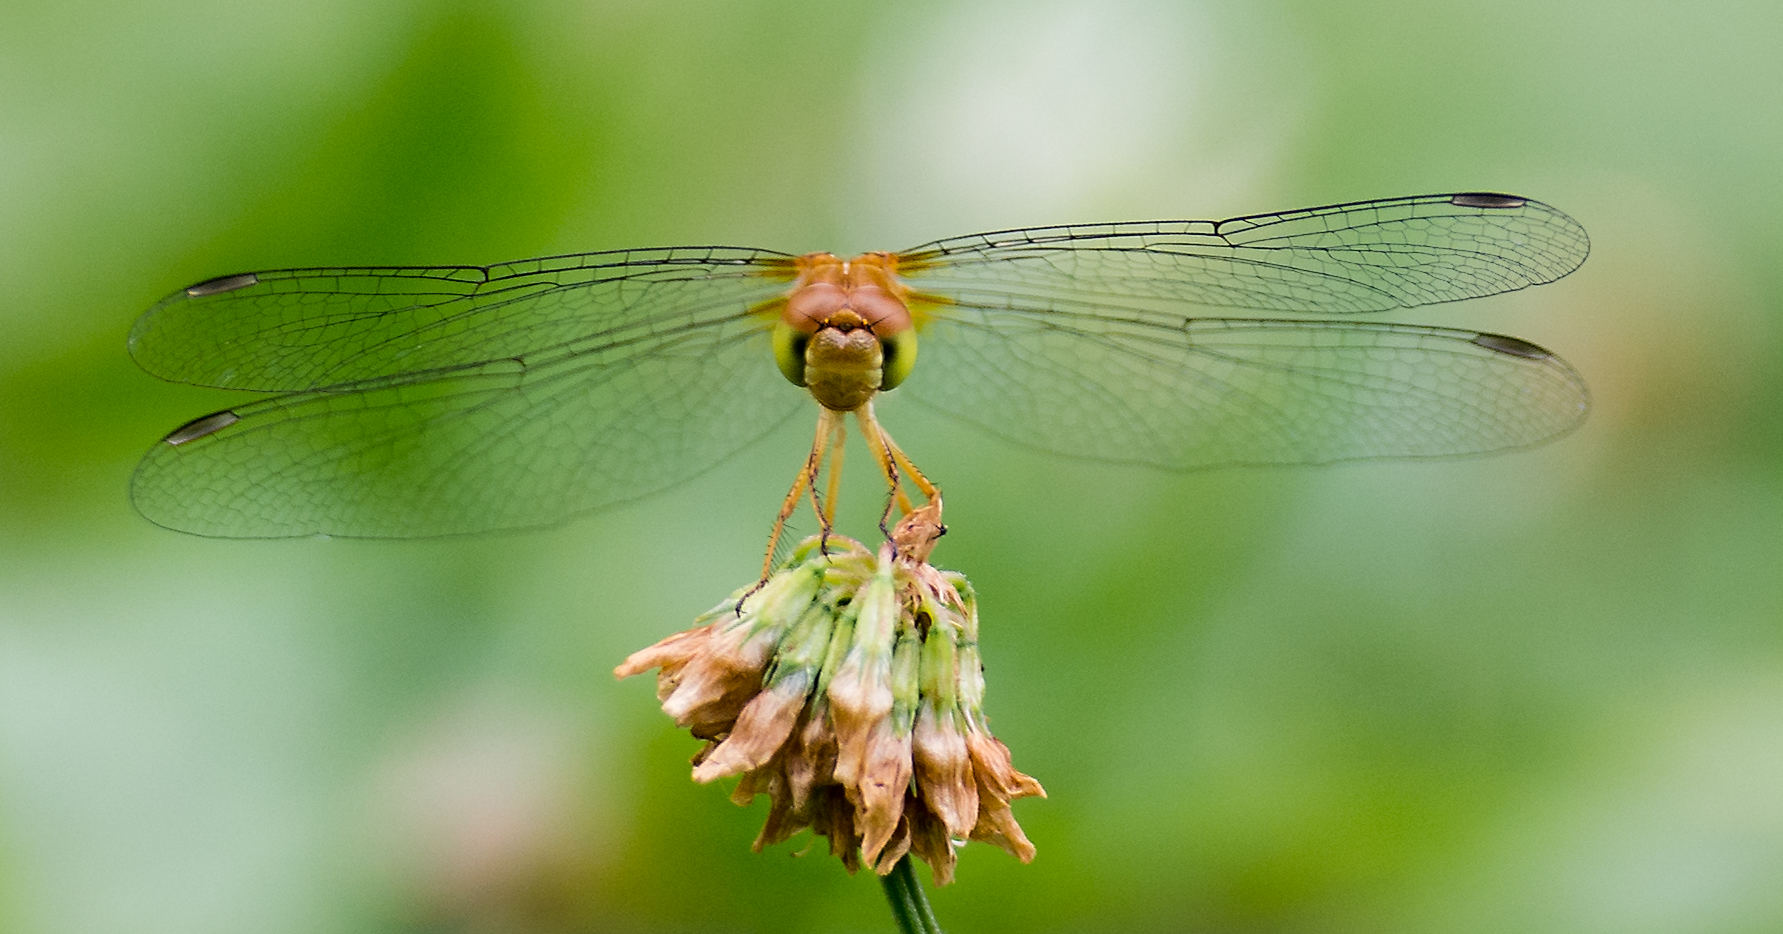 Dragonfly with double pair of wide webbed wings of black fiber atop a shriveled flower head against a blurred green backdrop